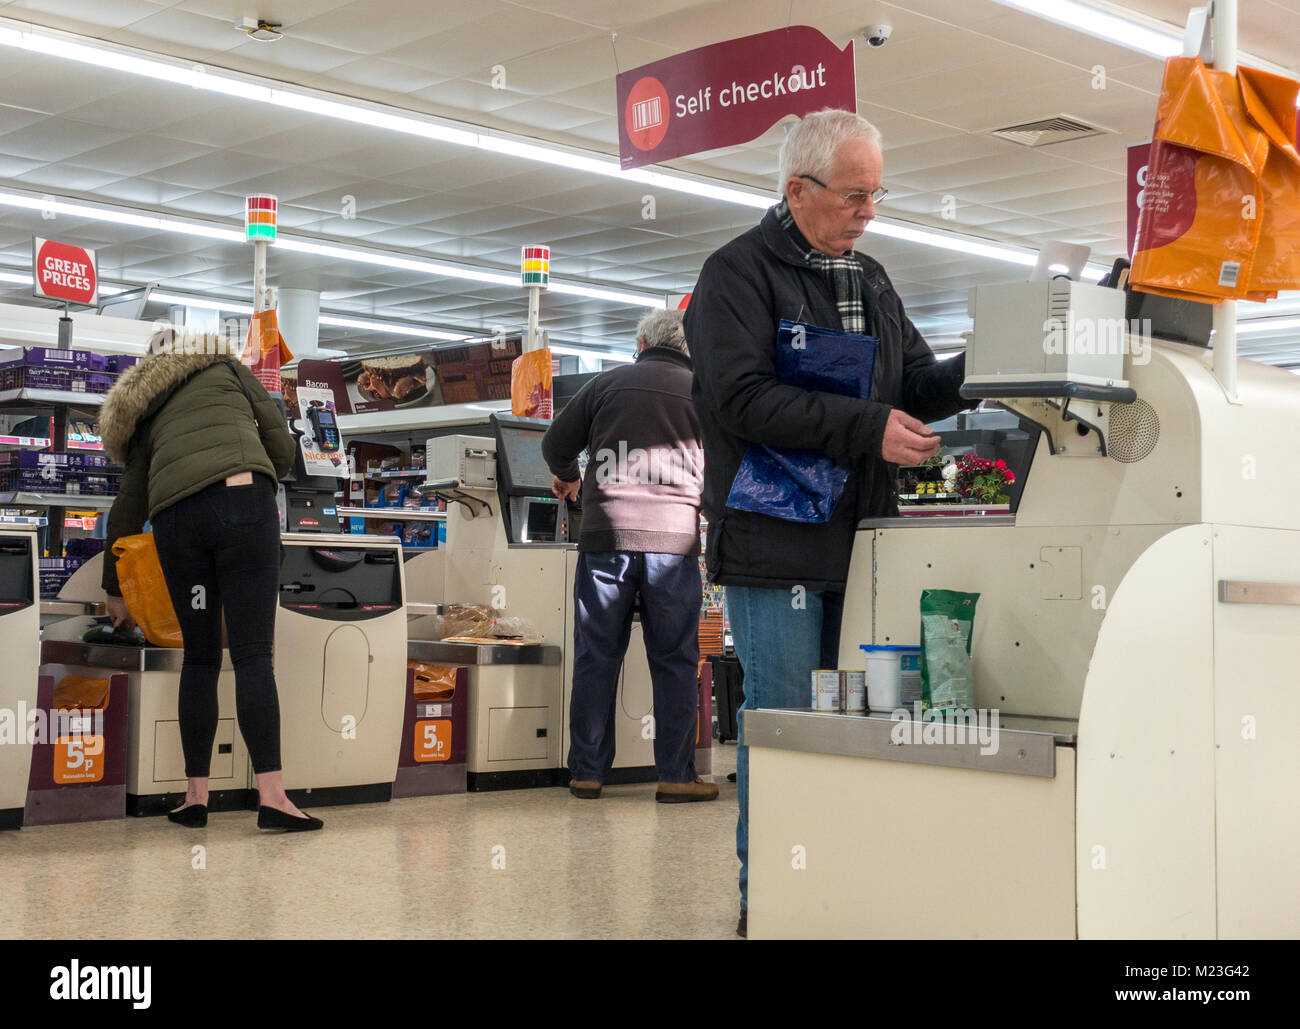 Three customers paying for their shopping at the self checkout area of Sainsbury's supermarket in Bourne, Lincolnshire, England, UK. Stock Photo